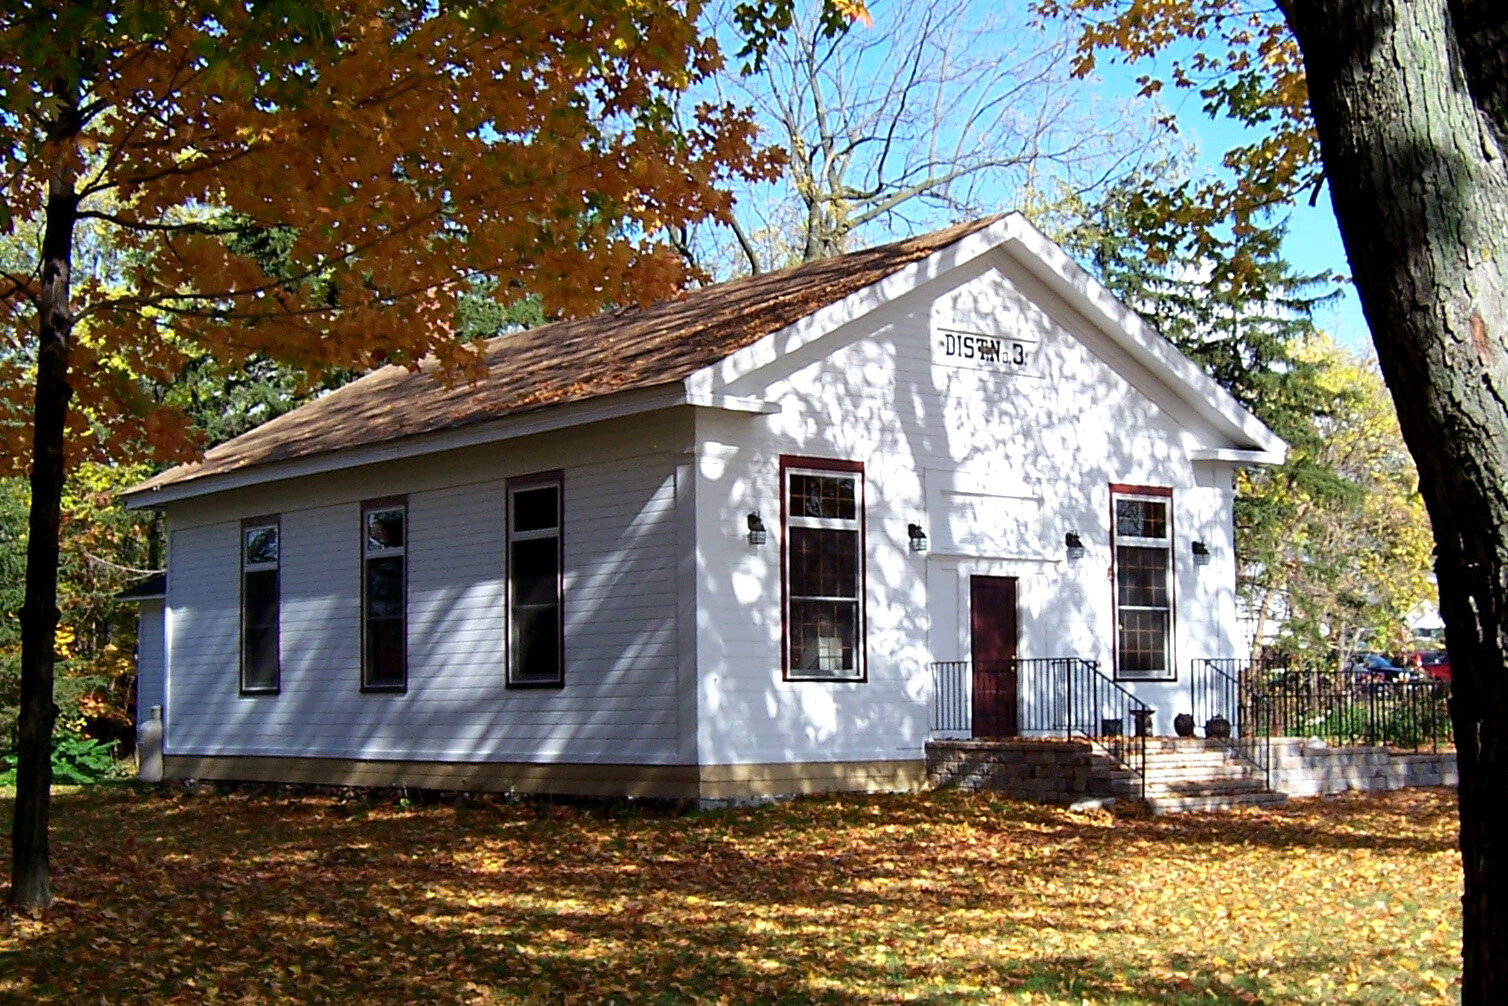 Old white schoolhouse building on a small hill in autumn, which has been converted into a pottery studio.